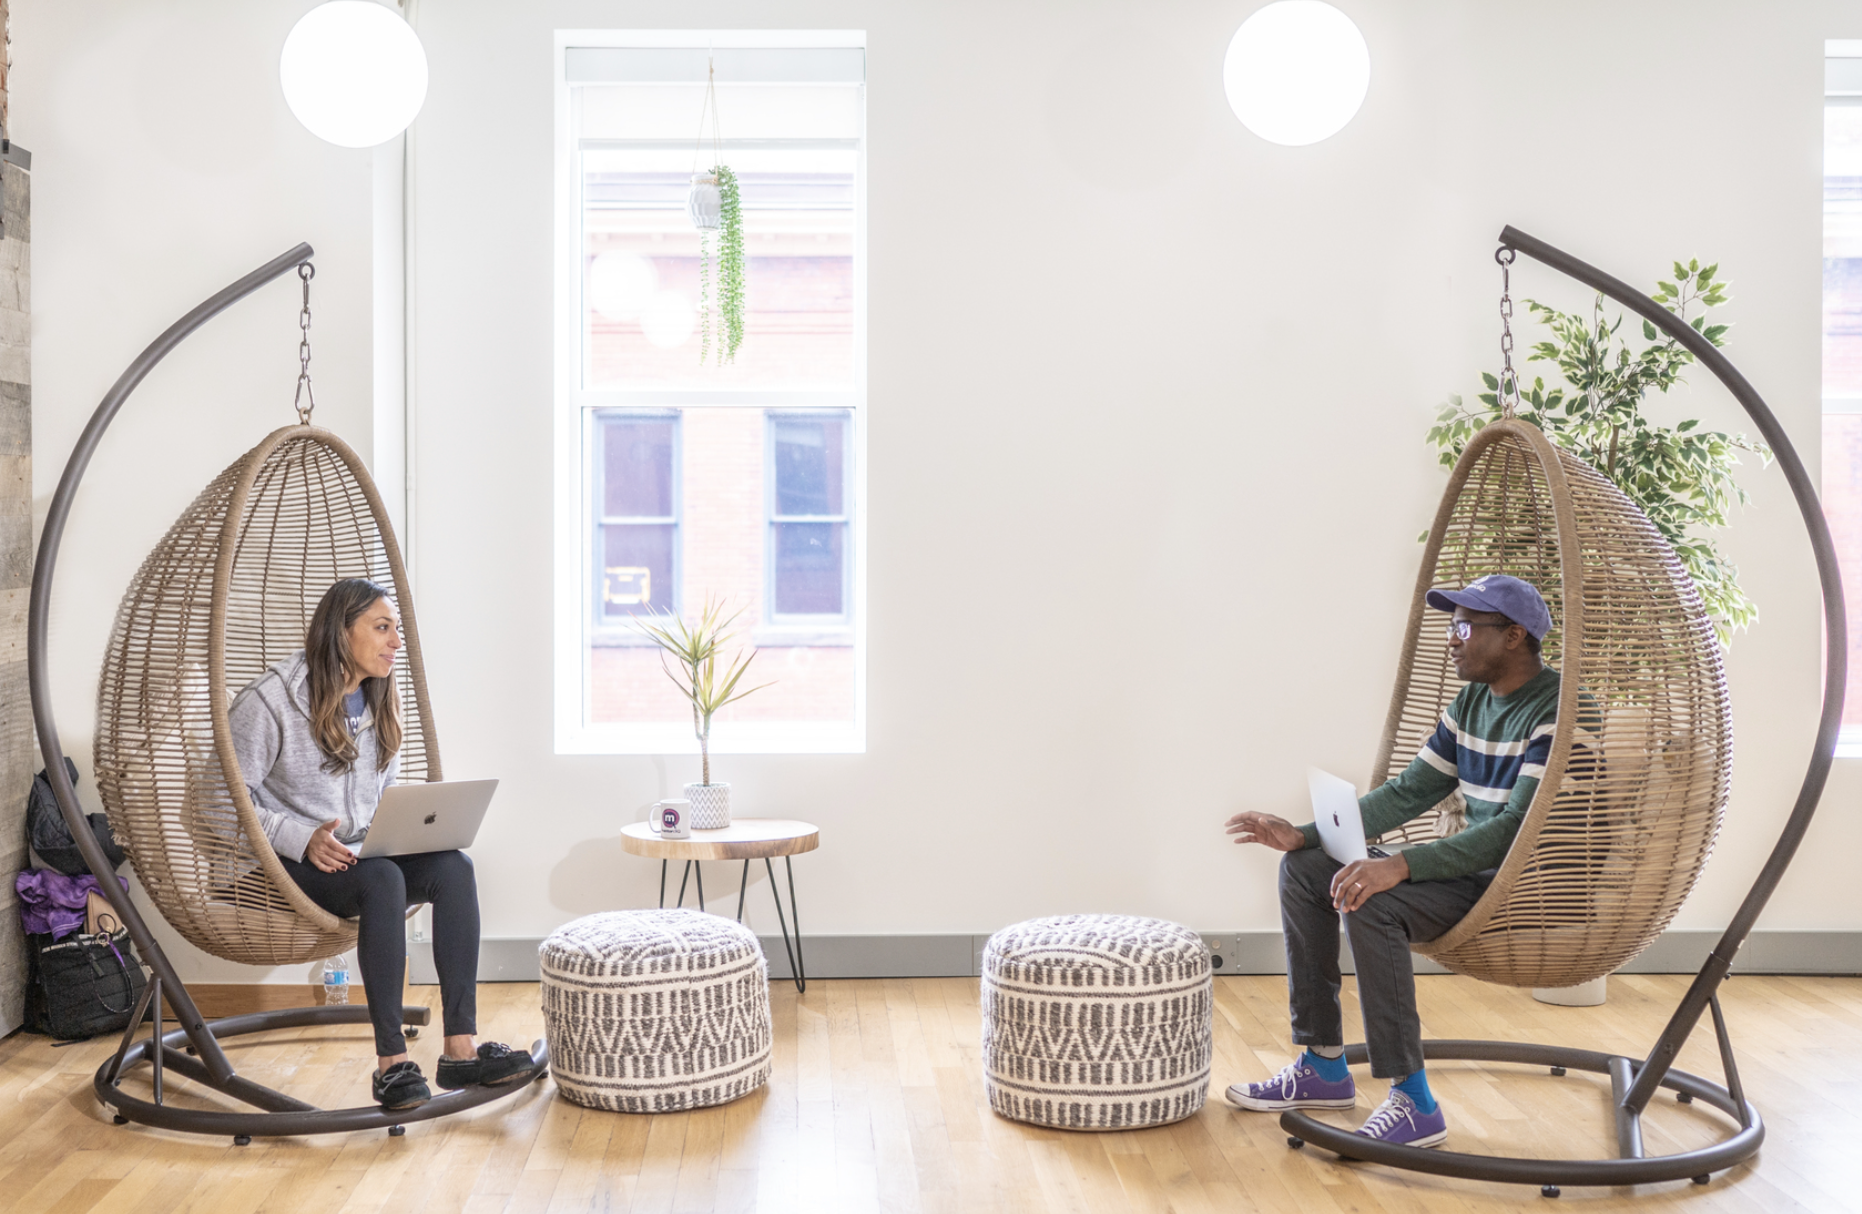 Engaging your mentoring in hanging chairs